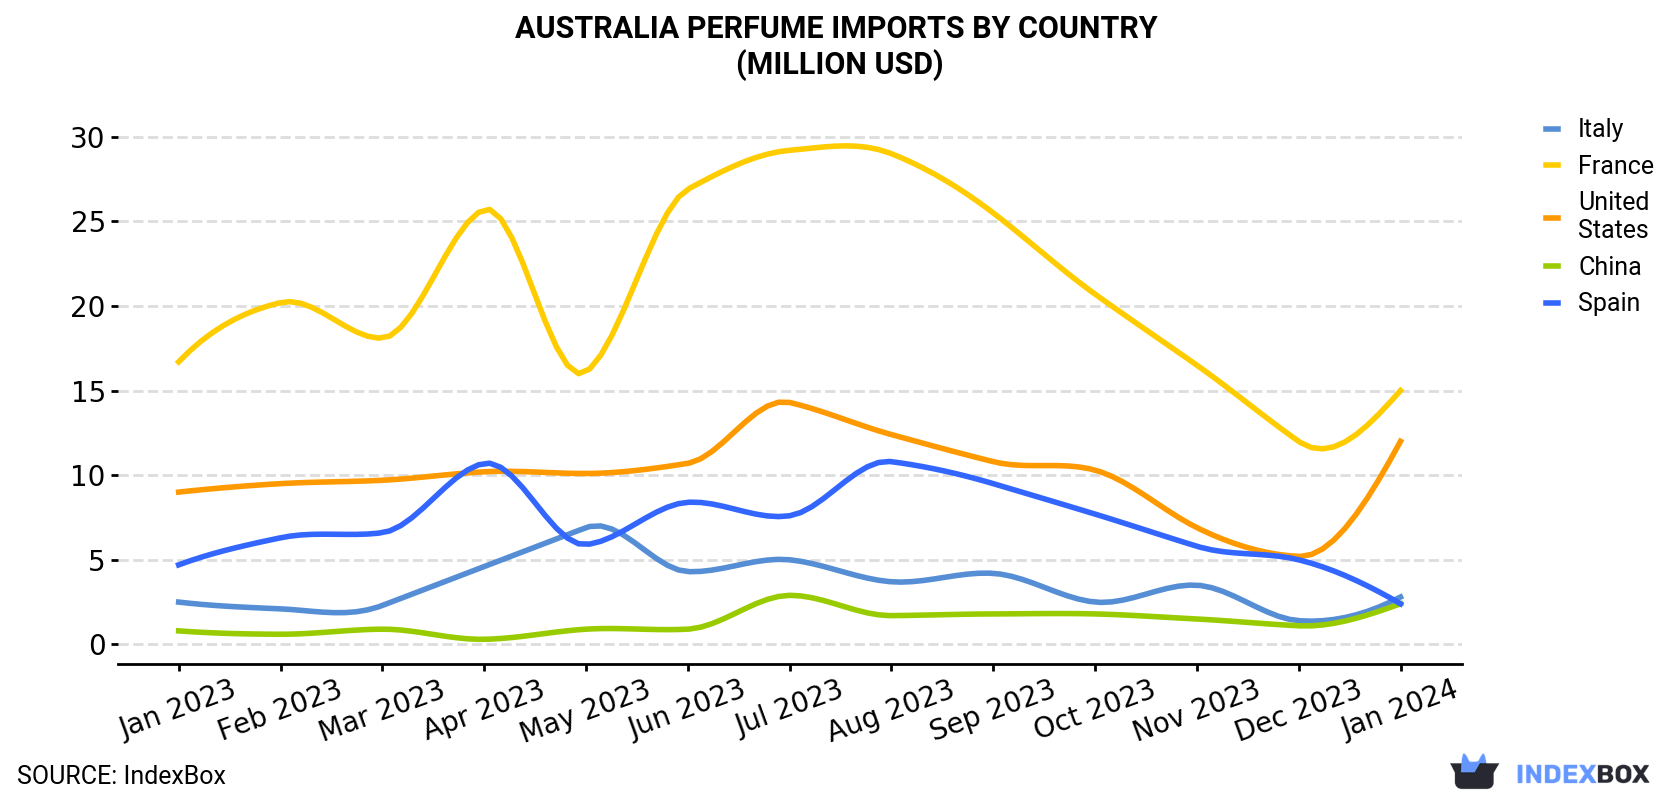 Australia Perfume Imports By Country (Million USD)